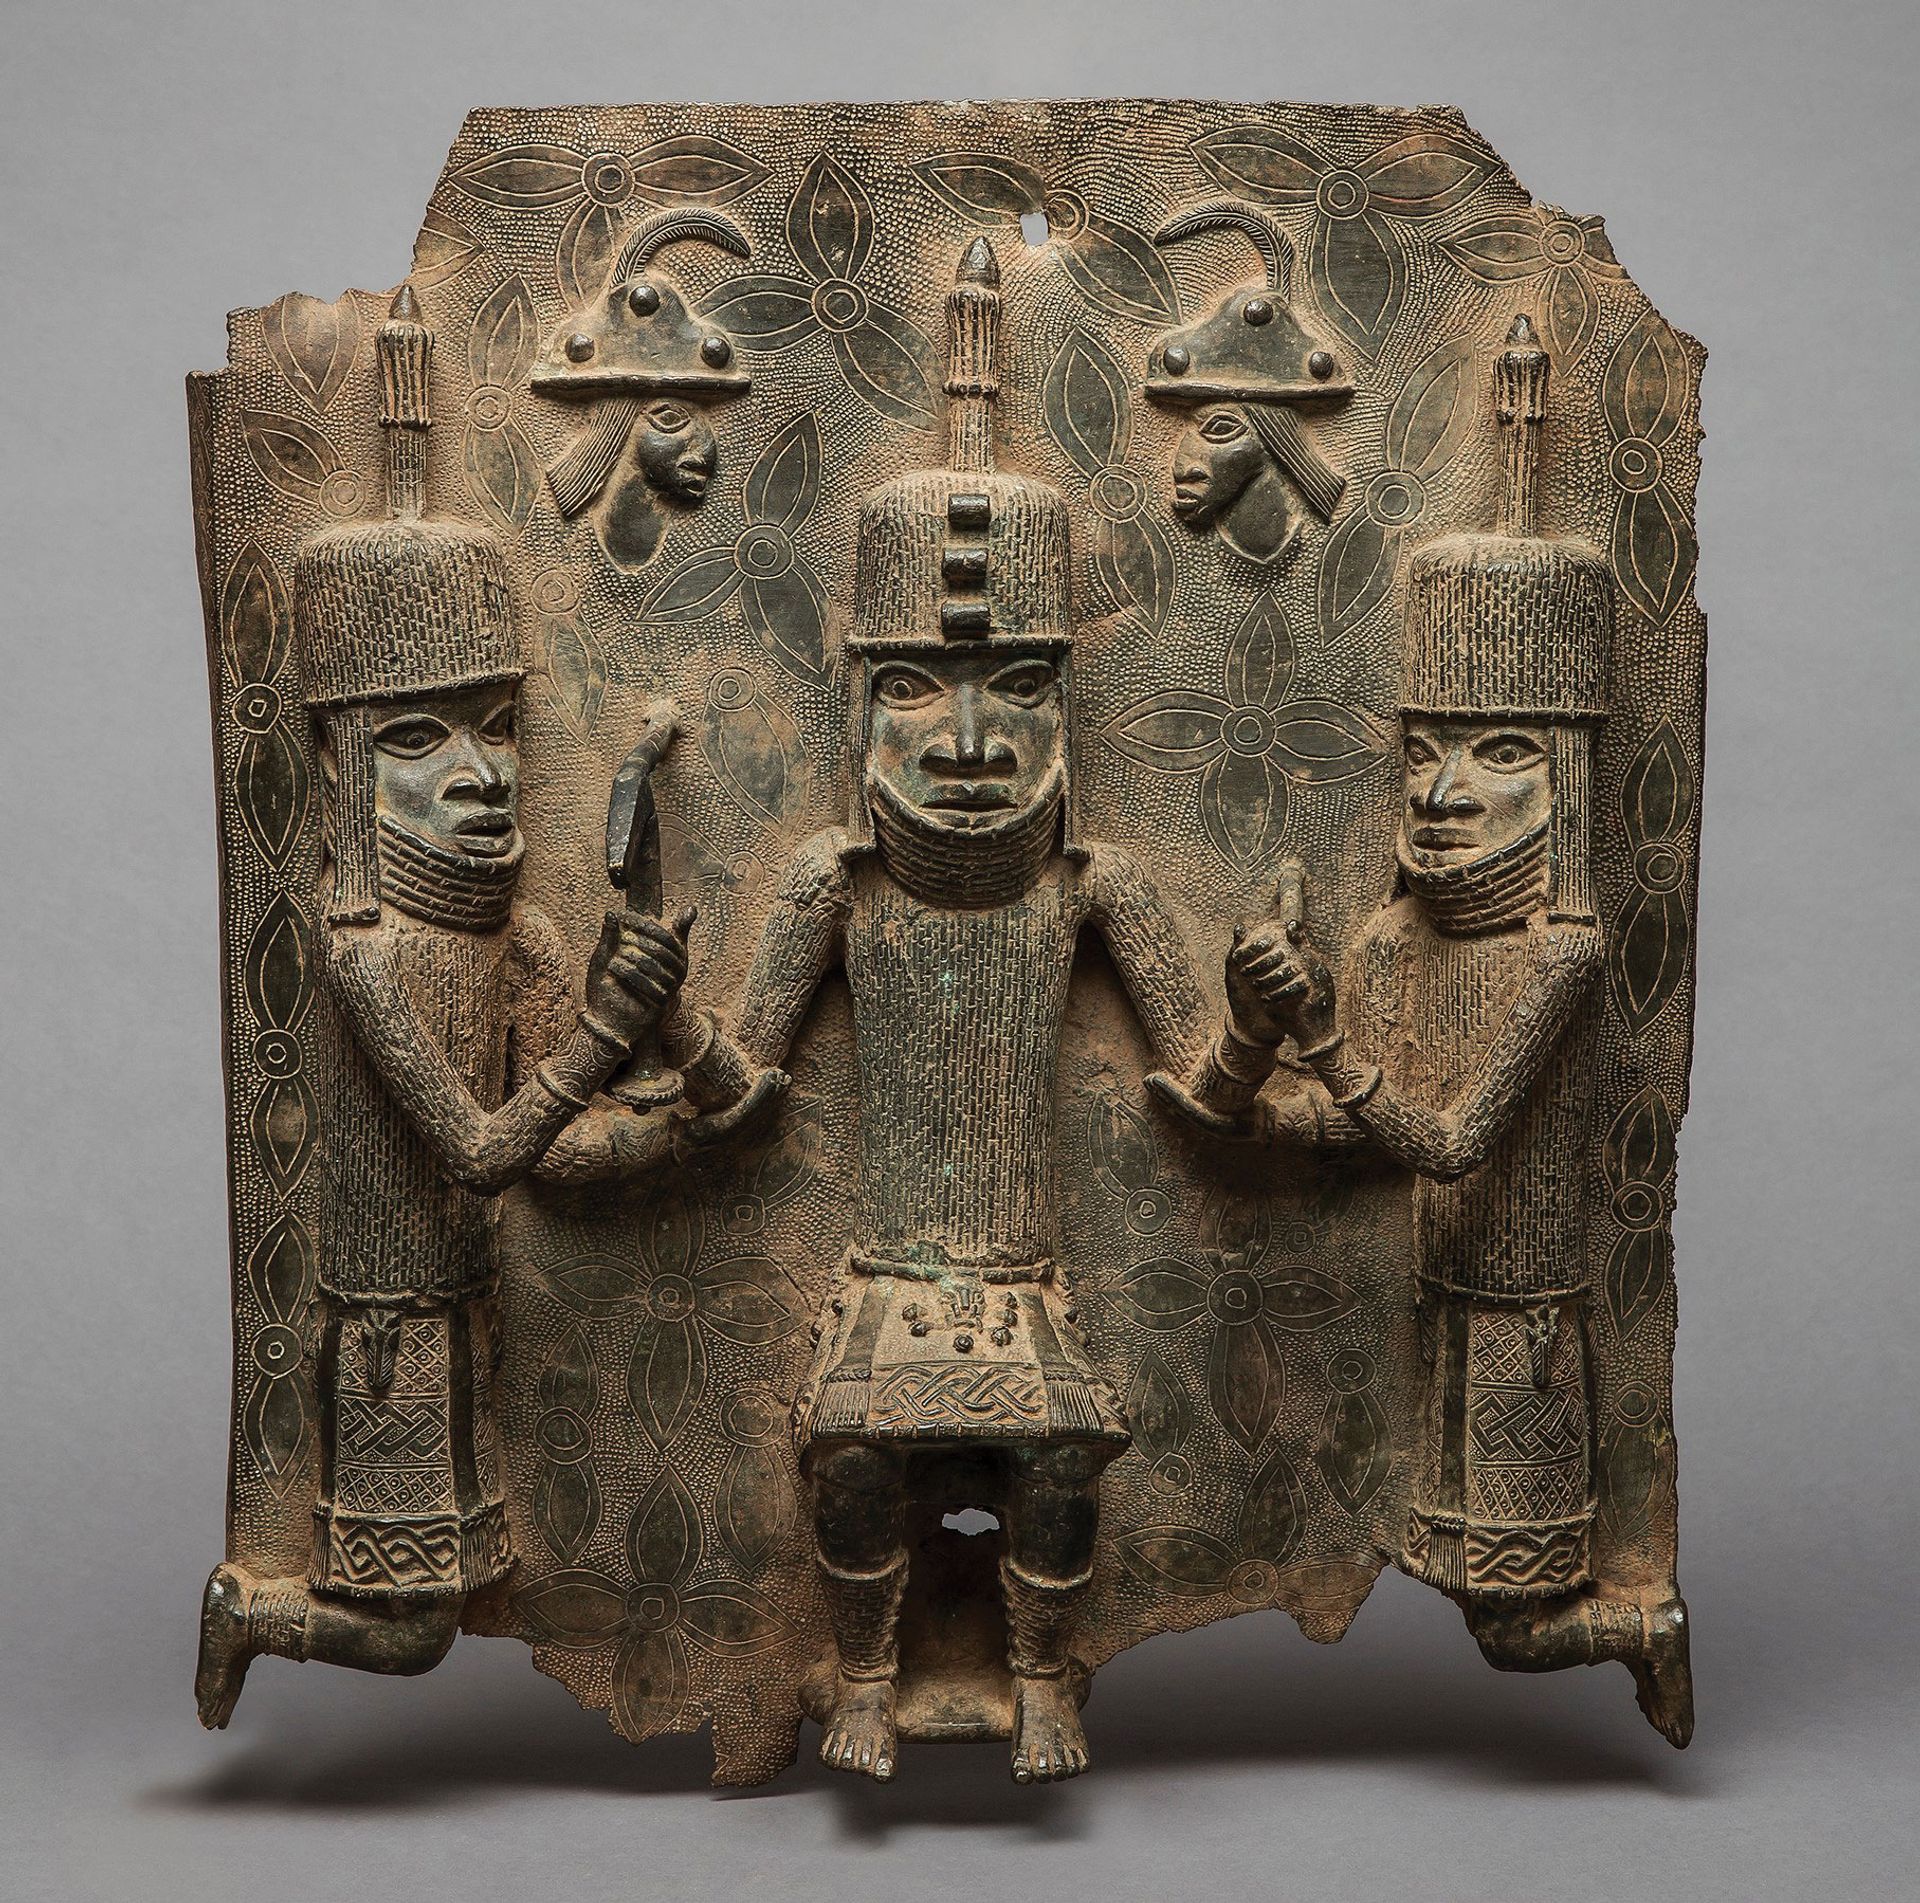 A Benin relief plaque (16th-17th centuries) showing the King with two dignitaries, currently in the collection of the Museum am Rothenbaum (MARKK) in Hamburg Photo: © Paul Schimweg/MARKK